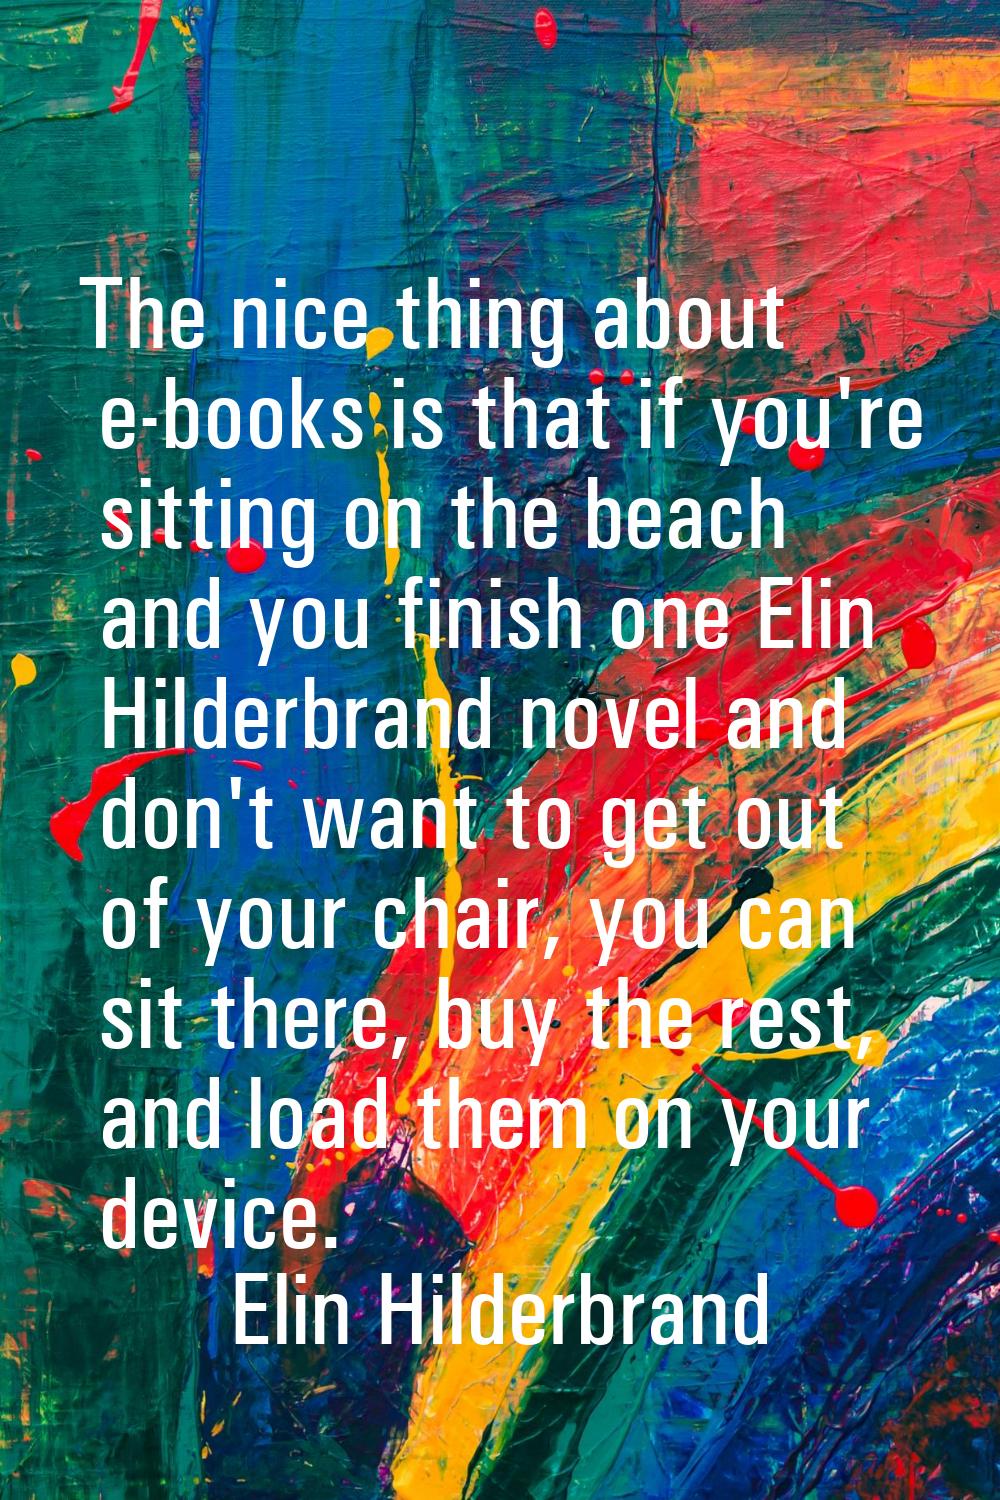 The nice thing about e-books is that if you're sitting on the beach and you finish one Elin Hilderb